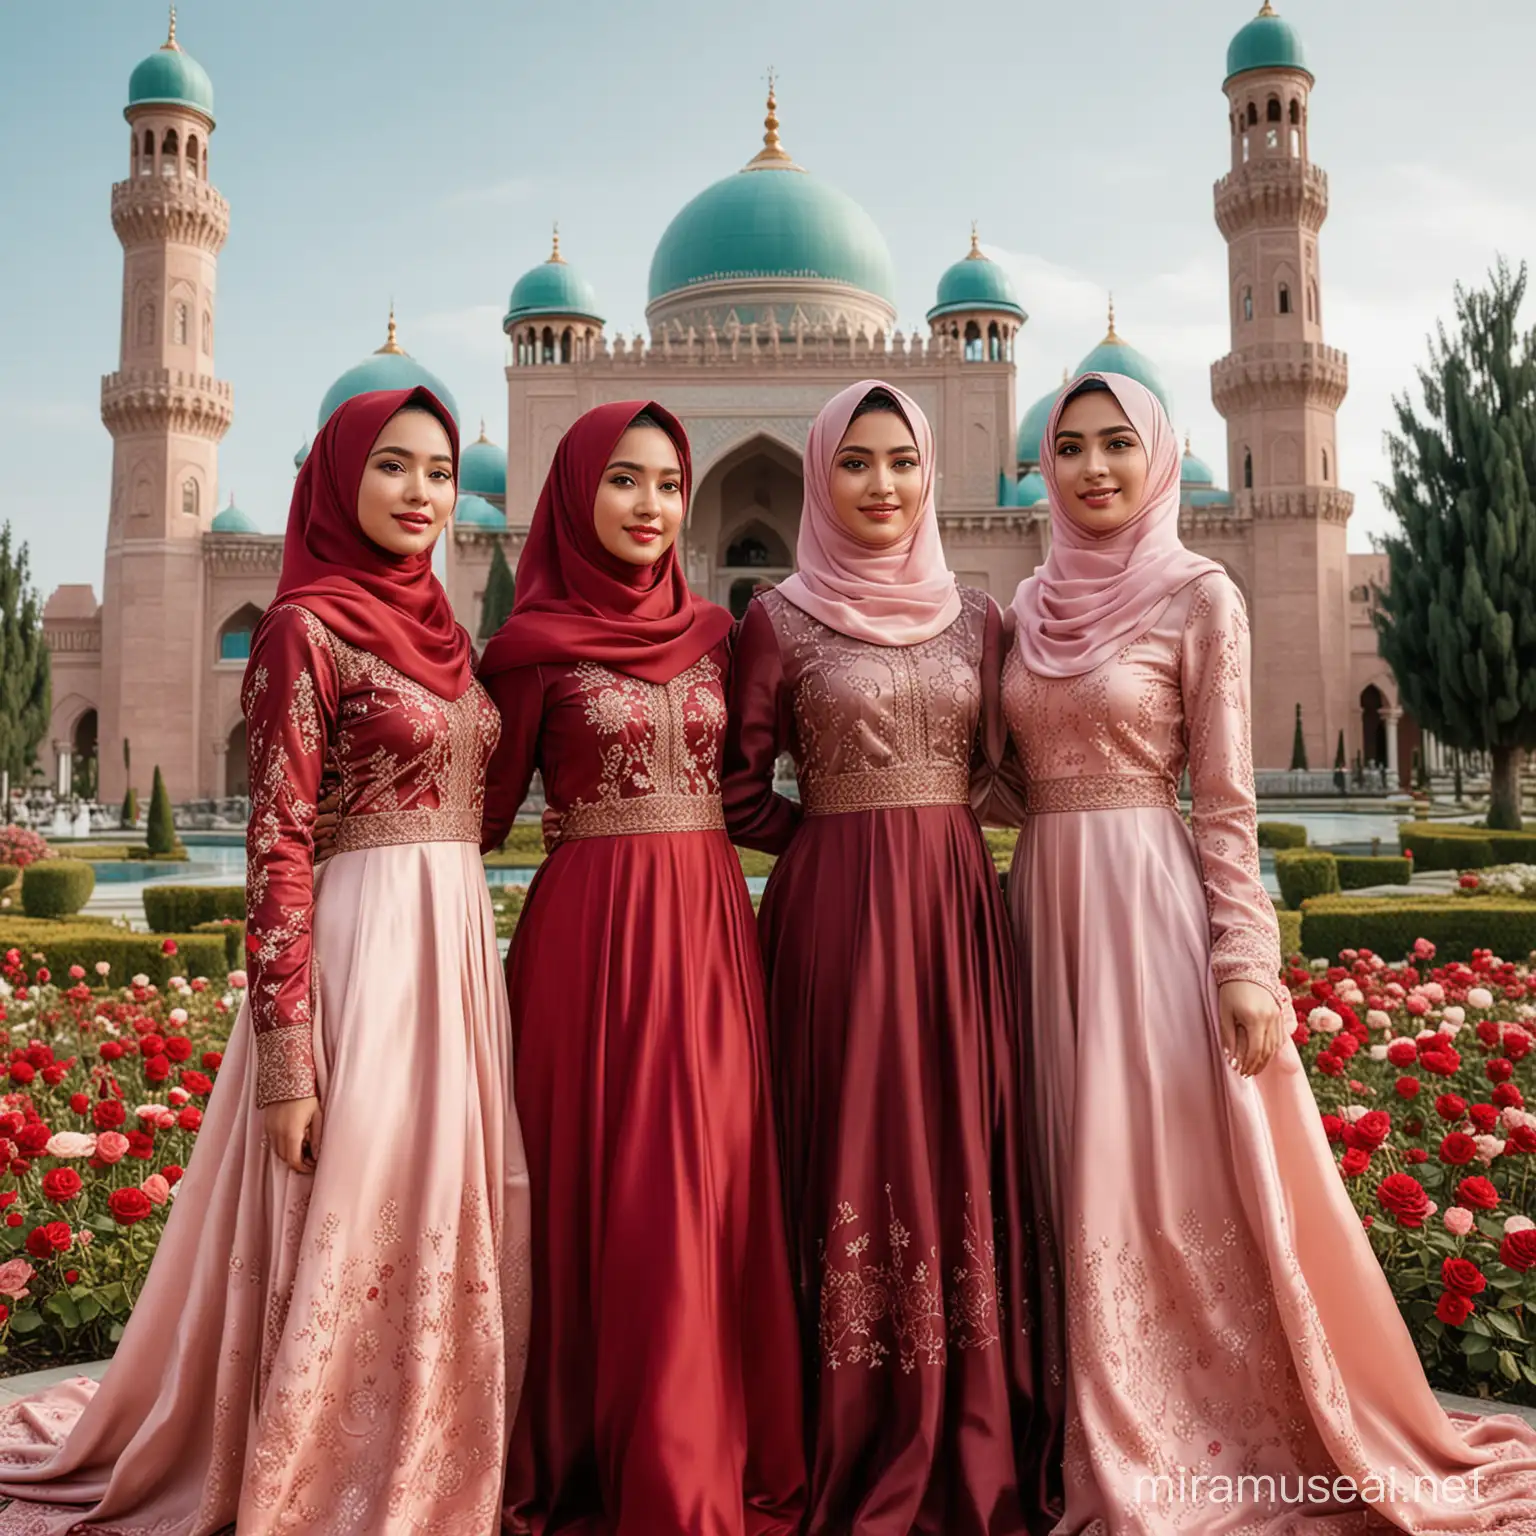 Indonesian Muslimah Princesses in Maroon Silk Dresses amid Vibrant Rose Garden and Mosque